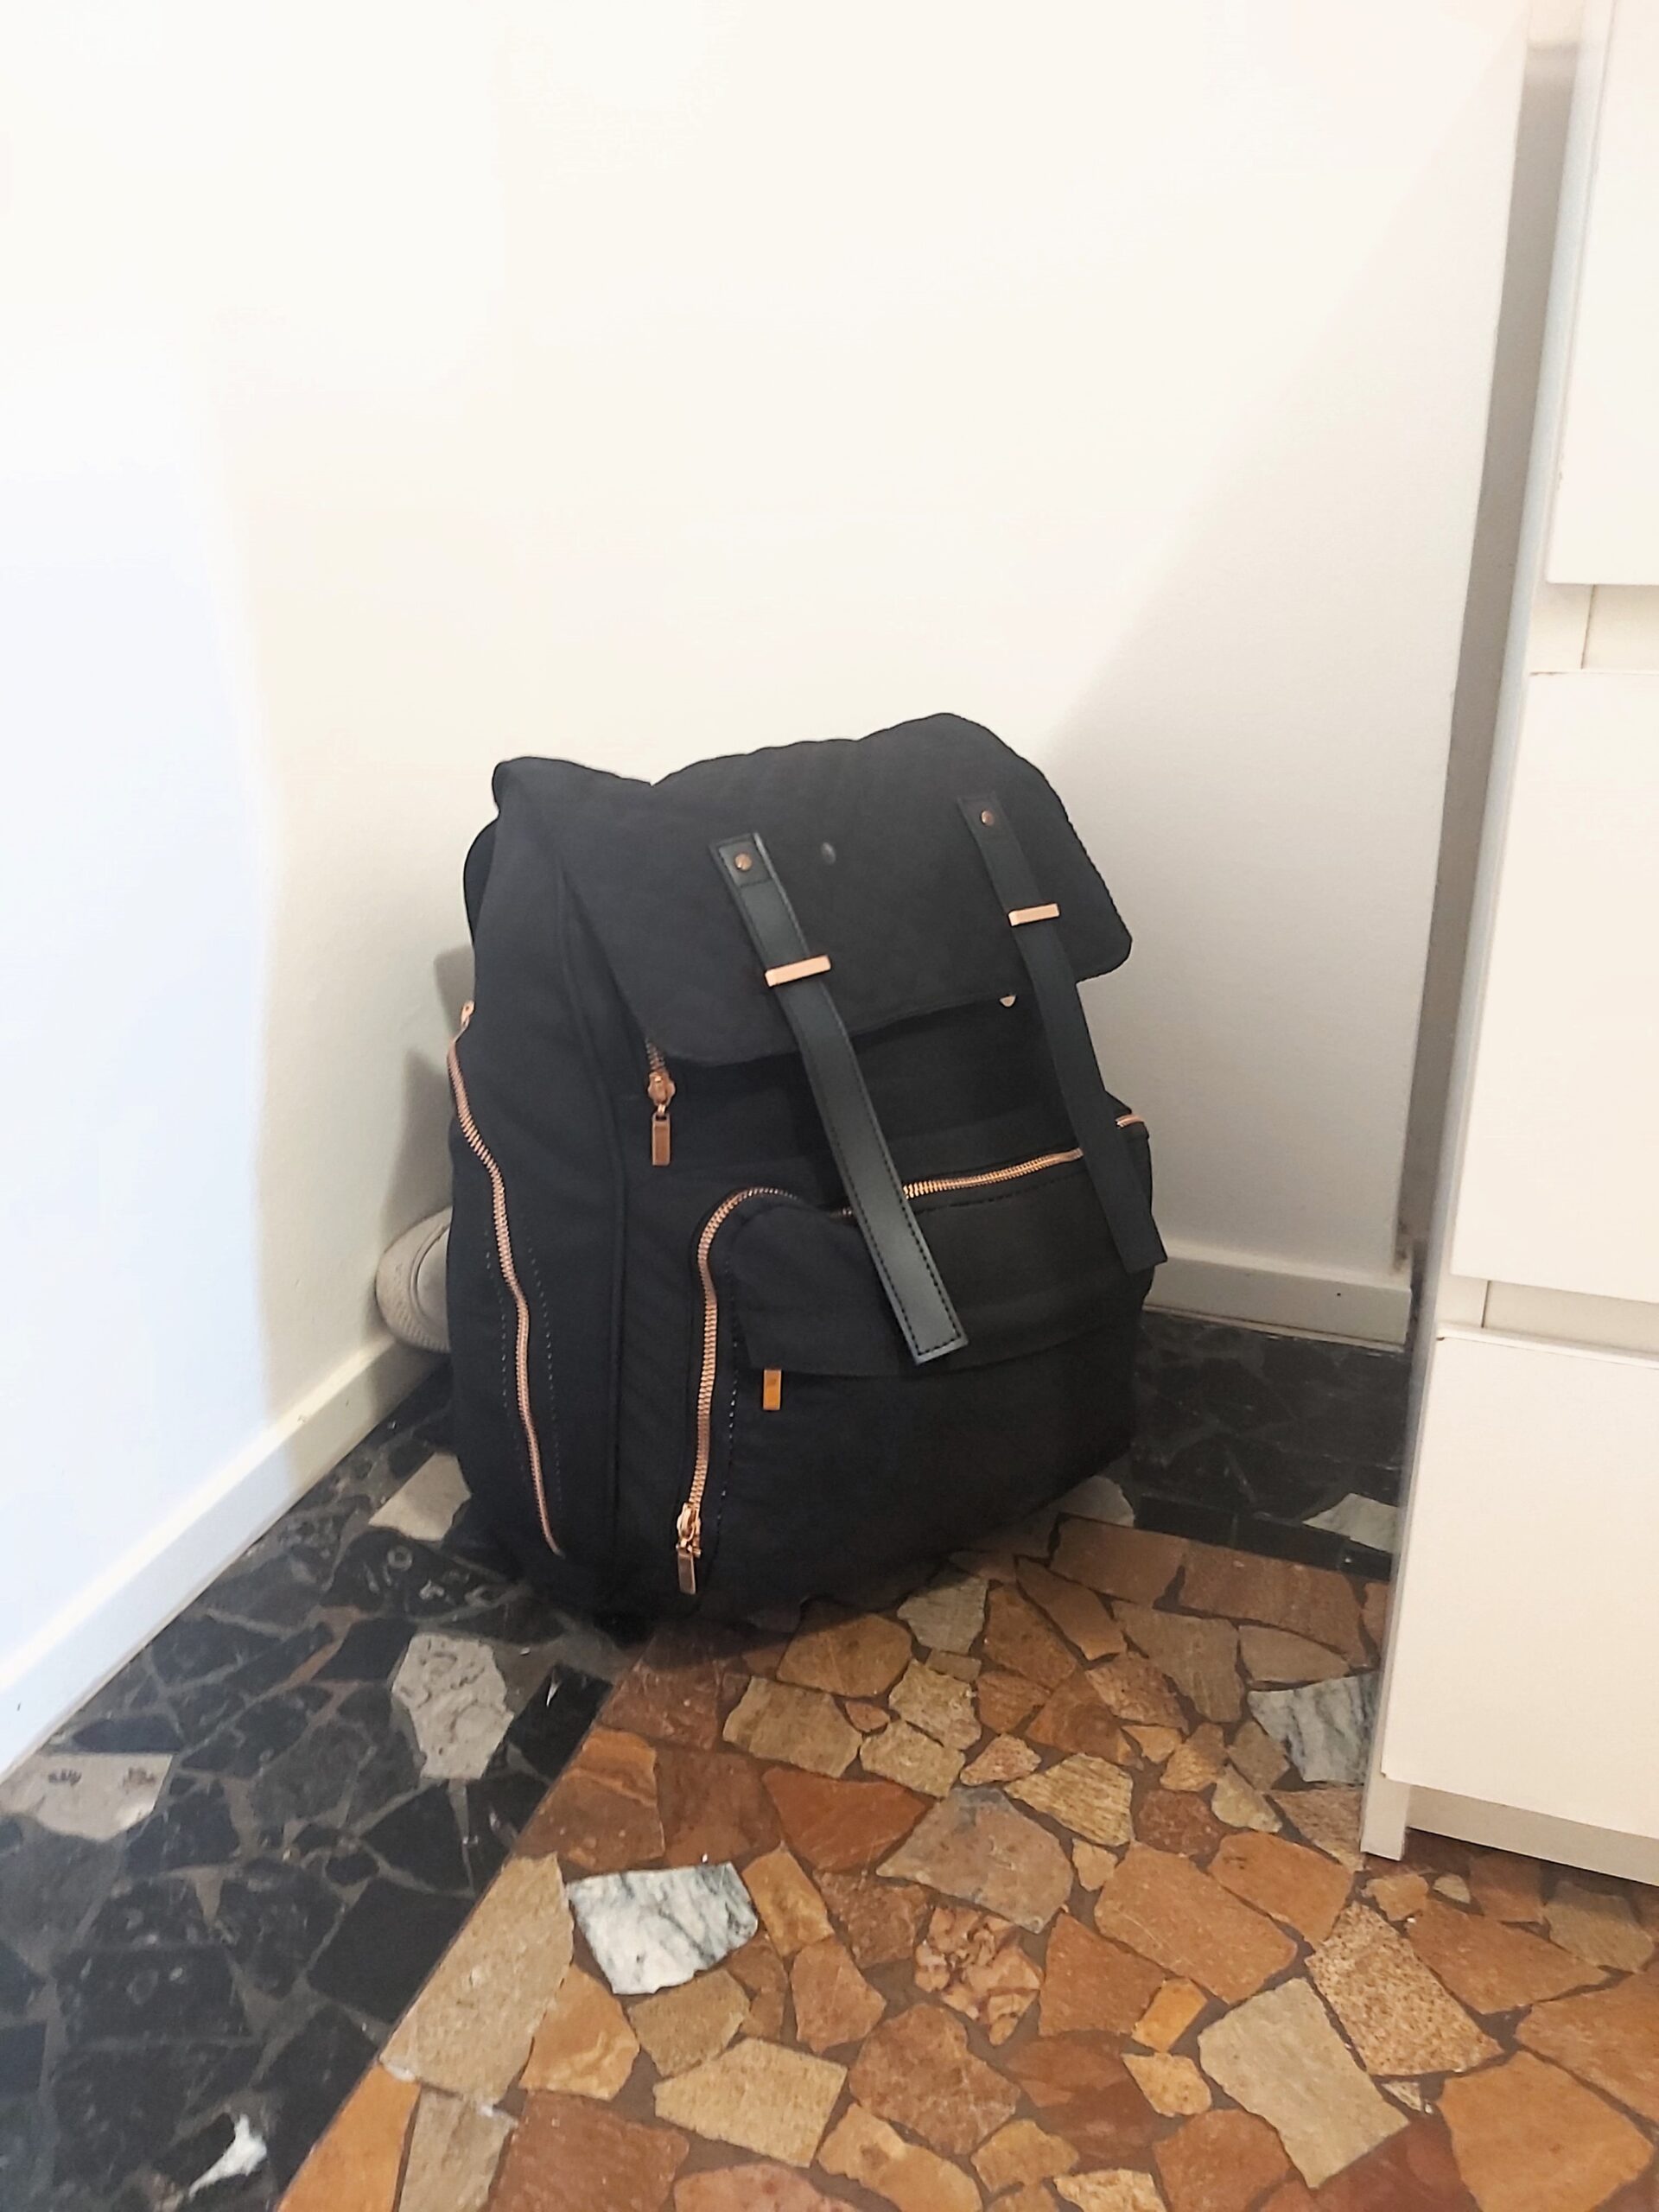 Wandering Lewis's little backpack in Venice View Guesthouse, Marghera, Italy